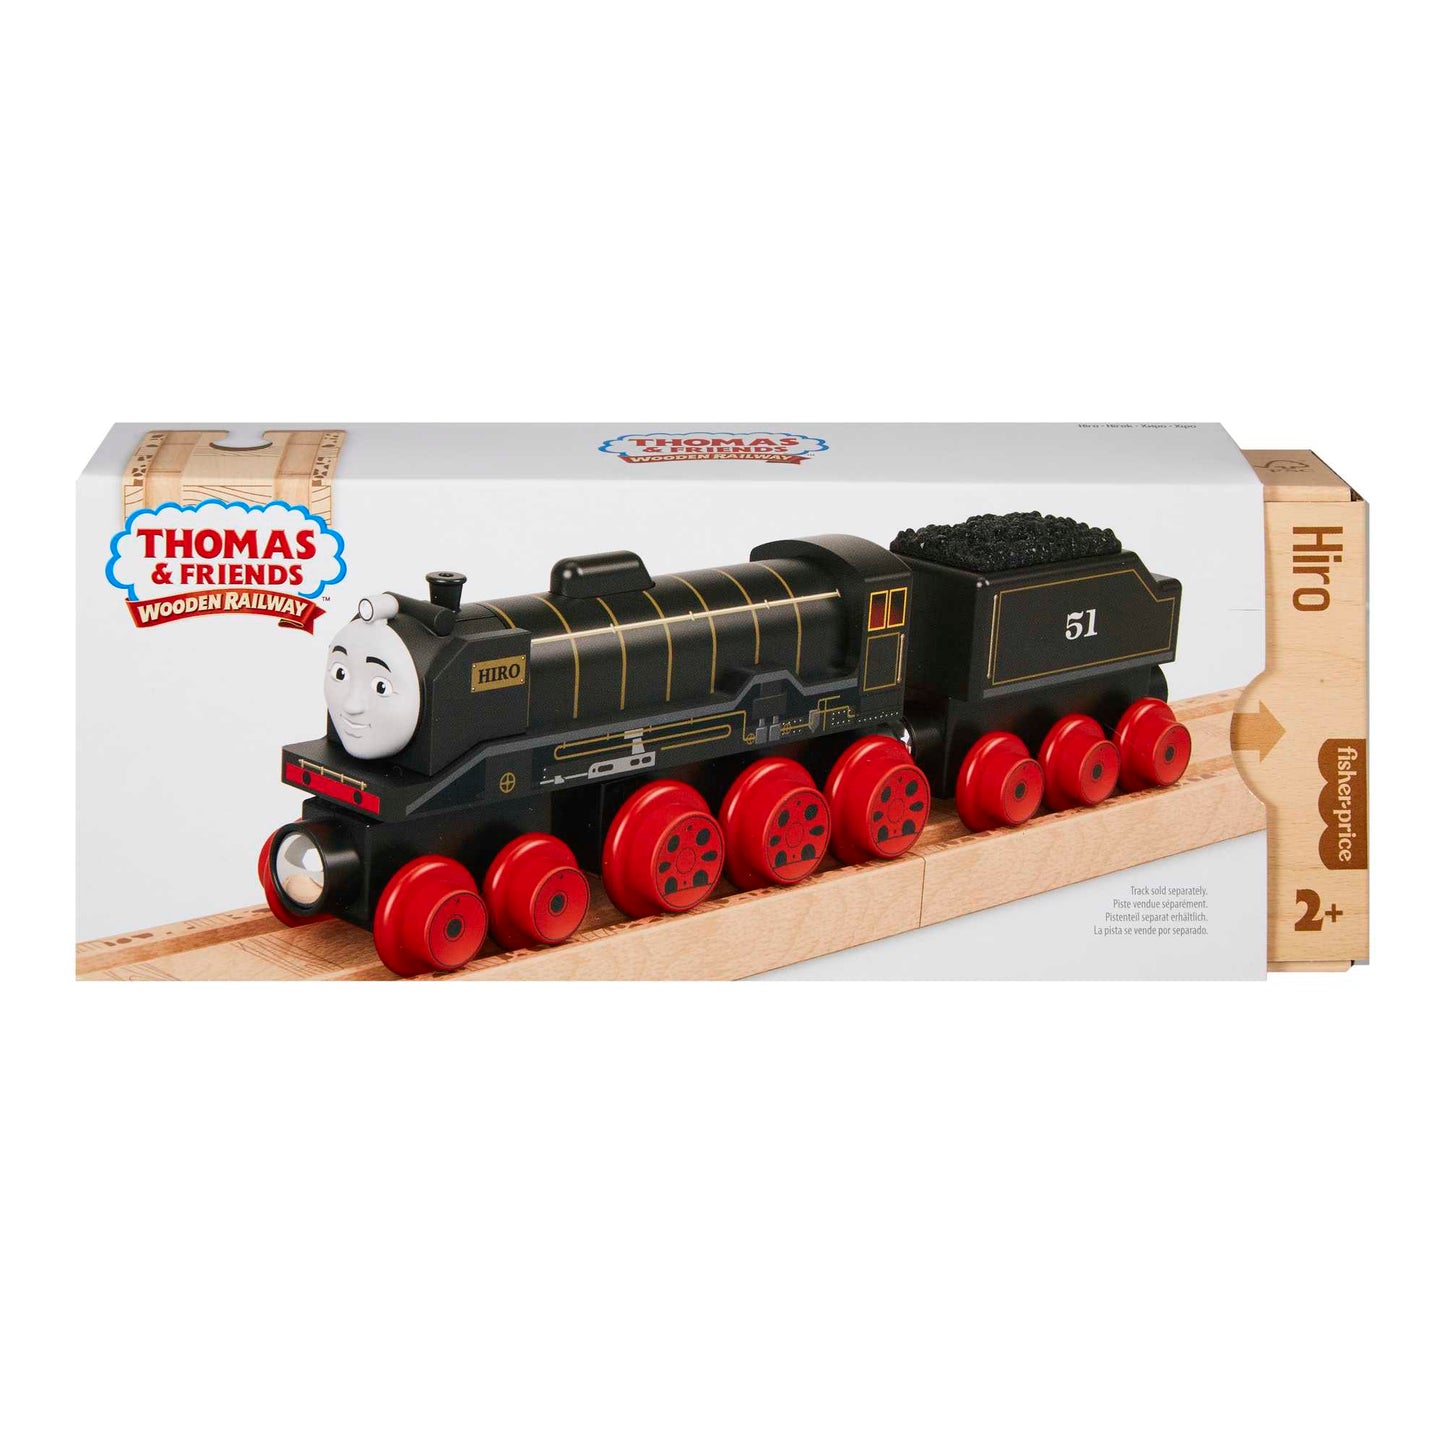 Fisher-Price Thomas & Friends Wooden Railway Hiro Engine and Coal-Car